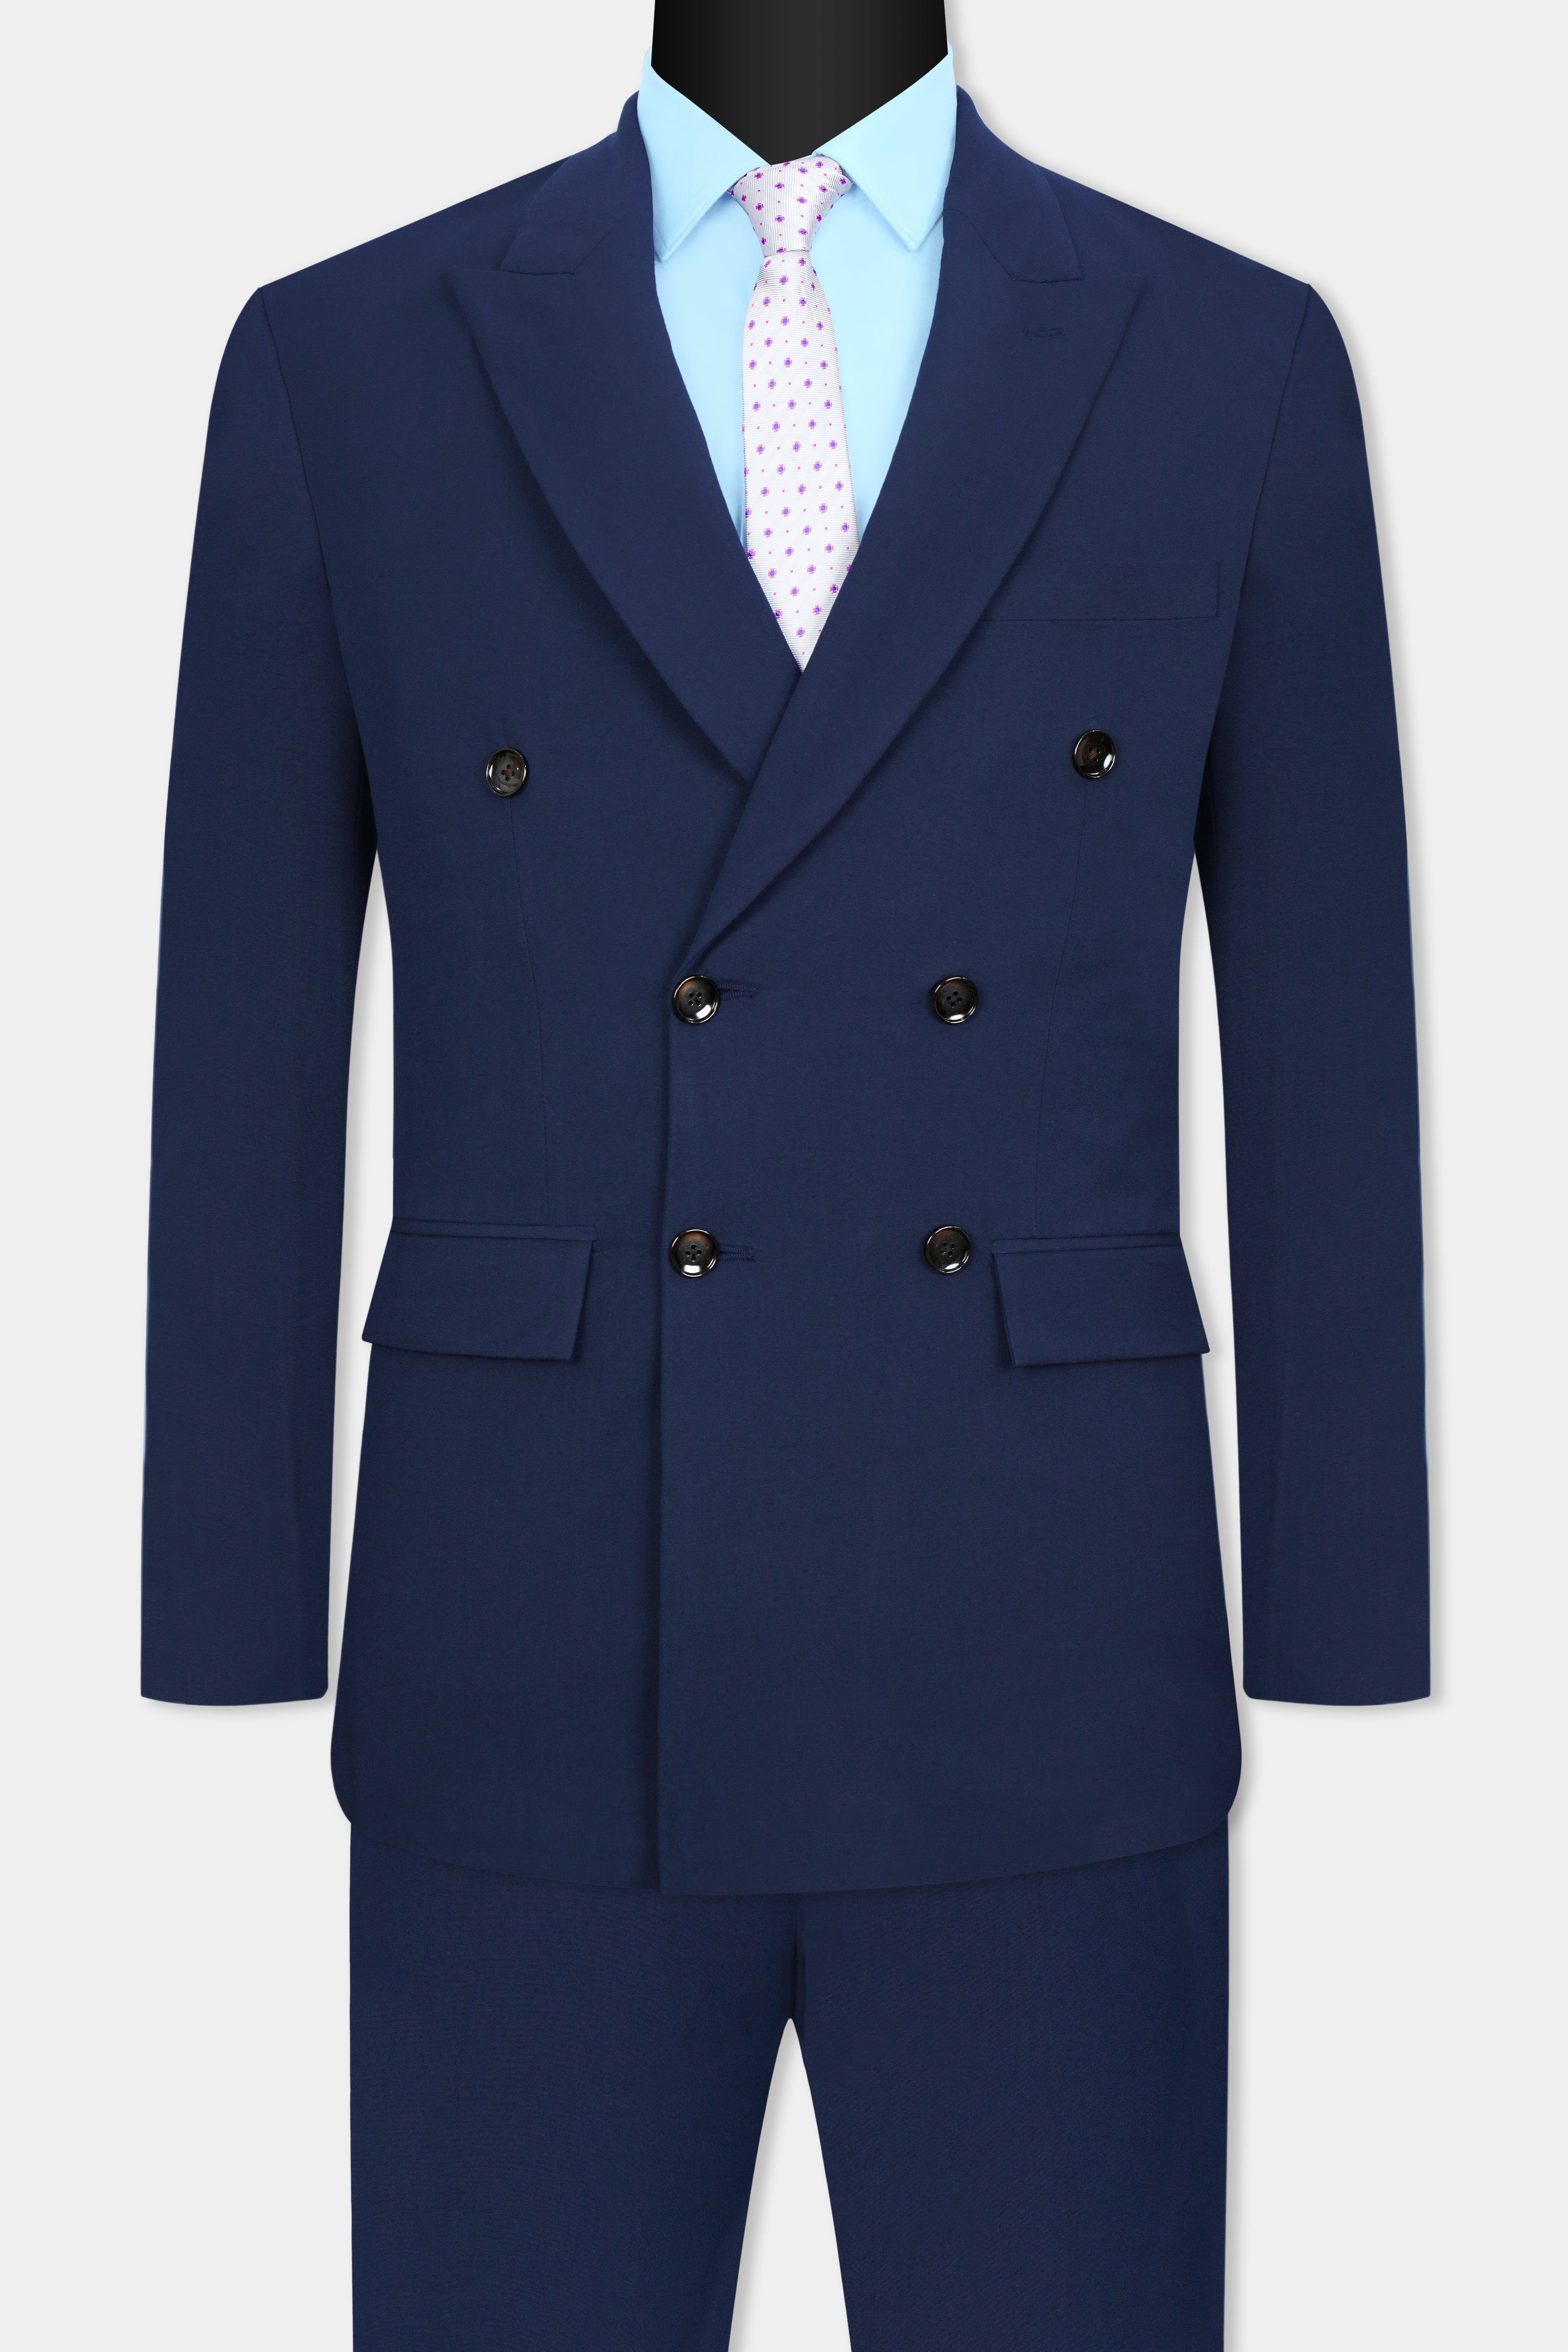 Cloud Burst Blue Wool Rich Double Breasted Stretchable Traveler Suit ST3078-DB-36, ST3078-DB-38, ST3078-DB-40, ST3078-DB-42, ST3078-DB-44, ST3078-DB-46, ST3078-DB-48, ST3078-DB-50, ST3078-DB-52, ST3078-DB-54, ST3078-DB-56, ST3078-DB-58, ST3078-DB-60